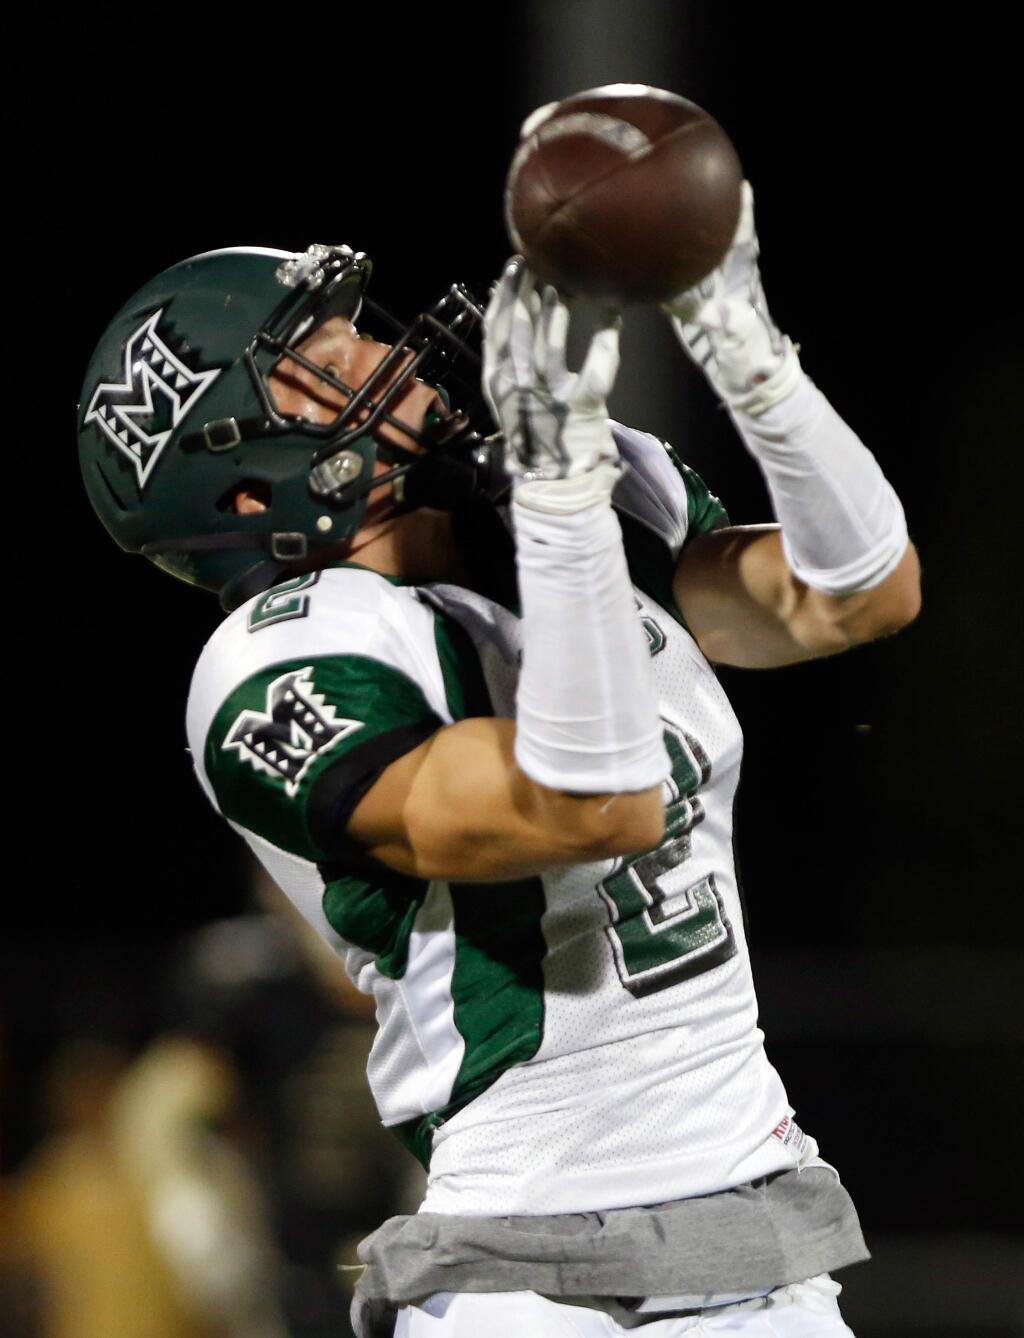 Miramonte's Ryan Anderson gets open but can't hold on to a pass during a varsity football game between Miramonte and Windsor high schools at Windsor High School in Windsor, California on Friday, September 11, 2015. (Alvin Jornada / The Press Democrat)